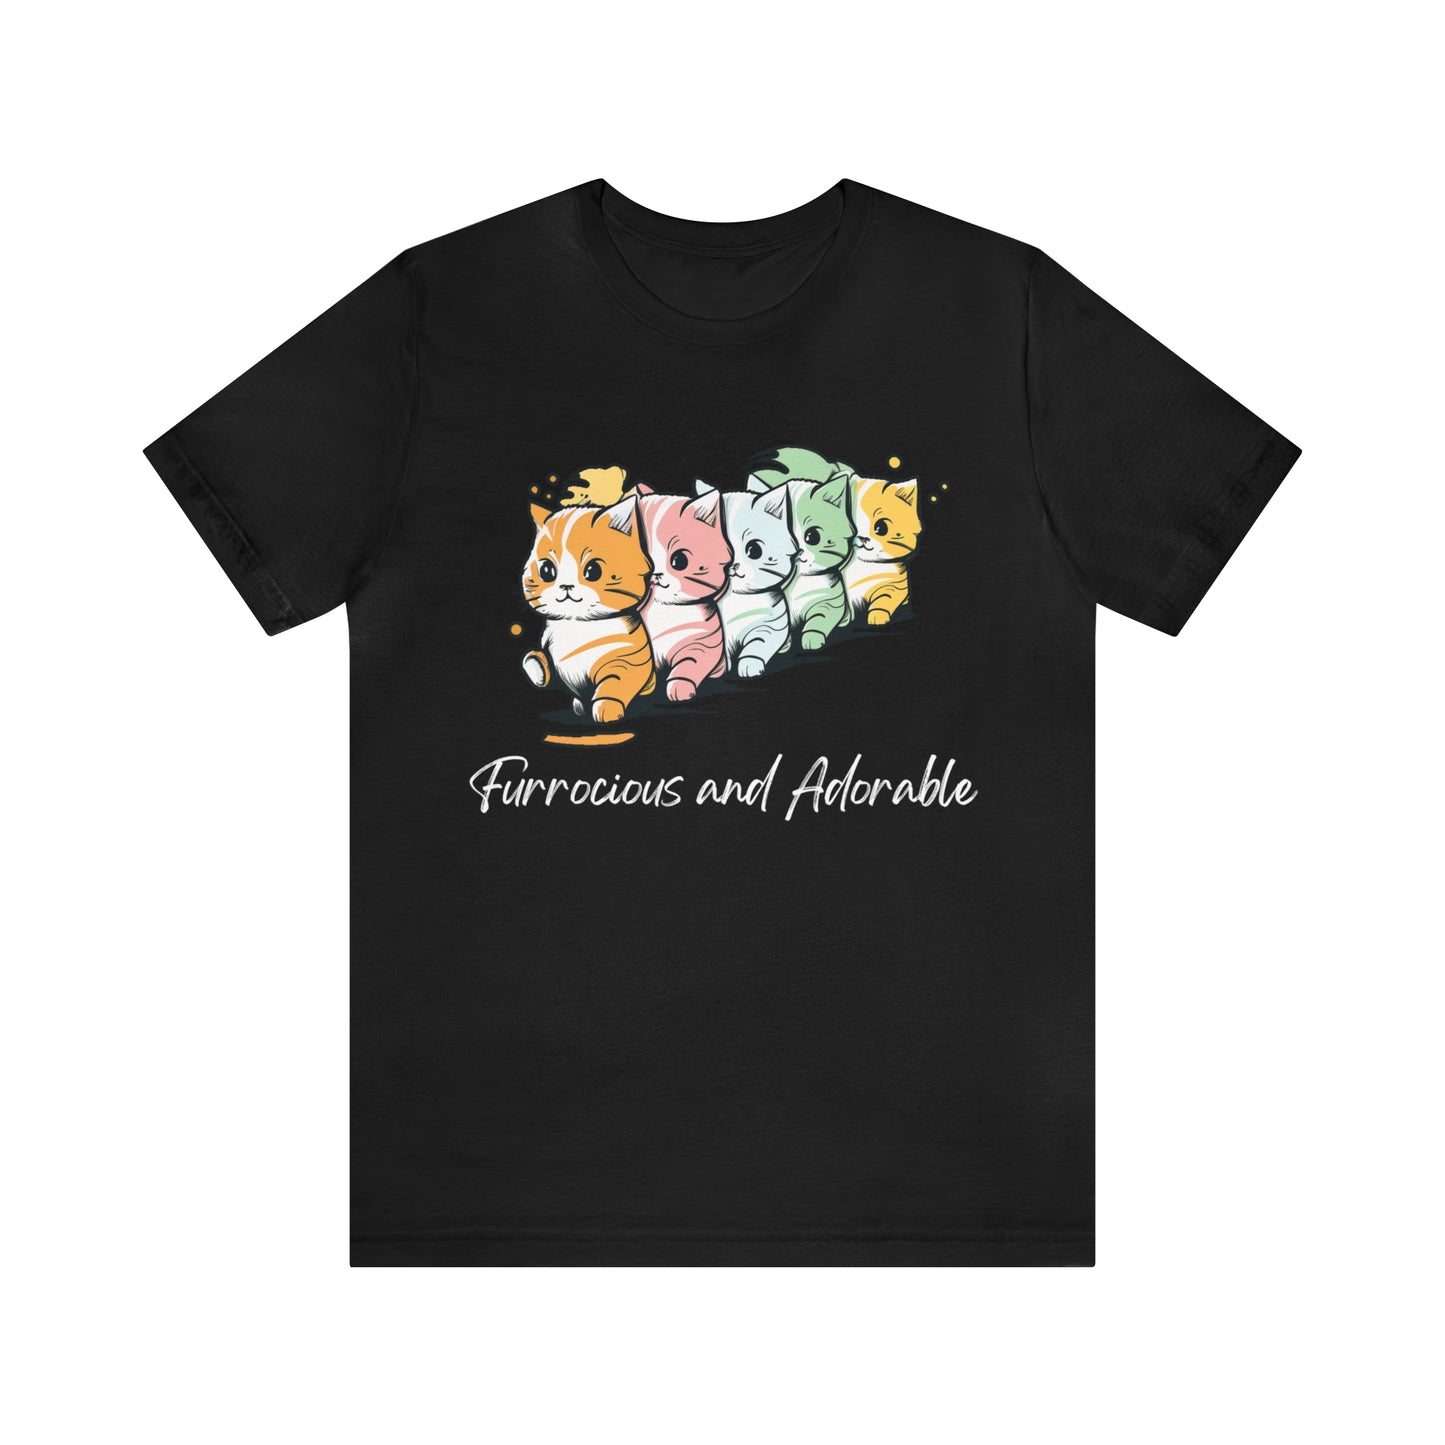 psychedelicBRANDz's Psychedeli-Cute Clawdyssey featuring five cute kittens on a black shirt